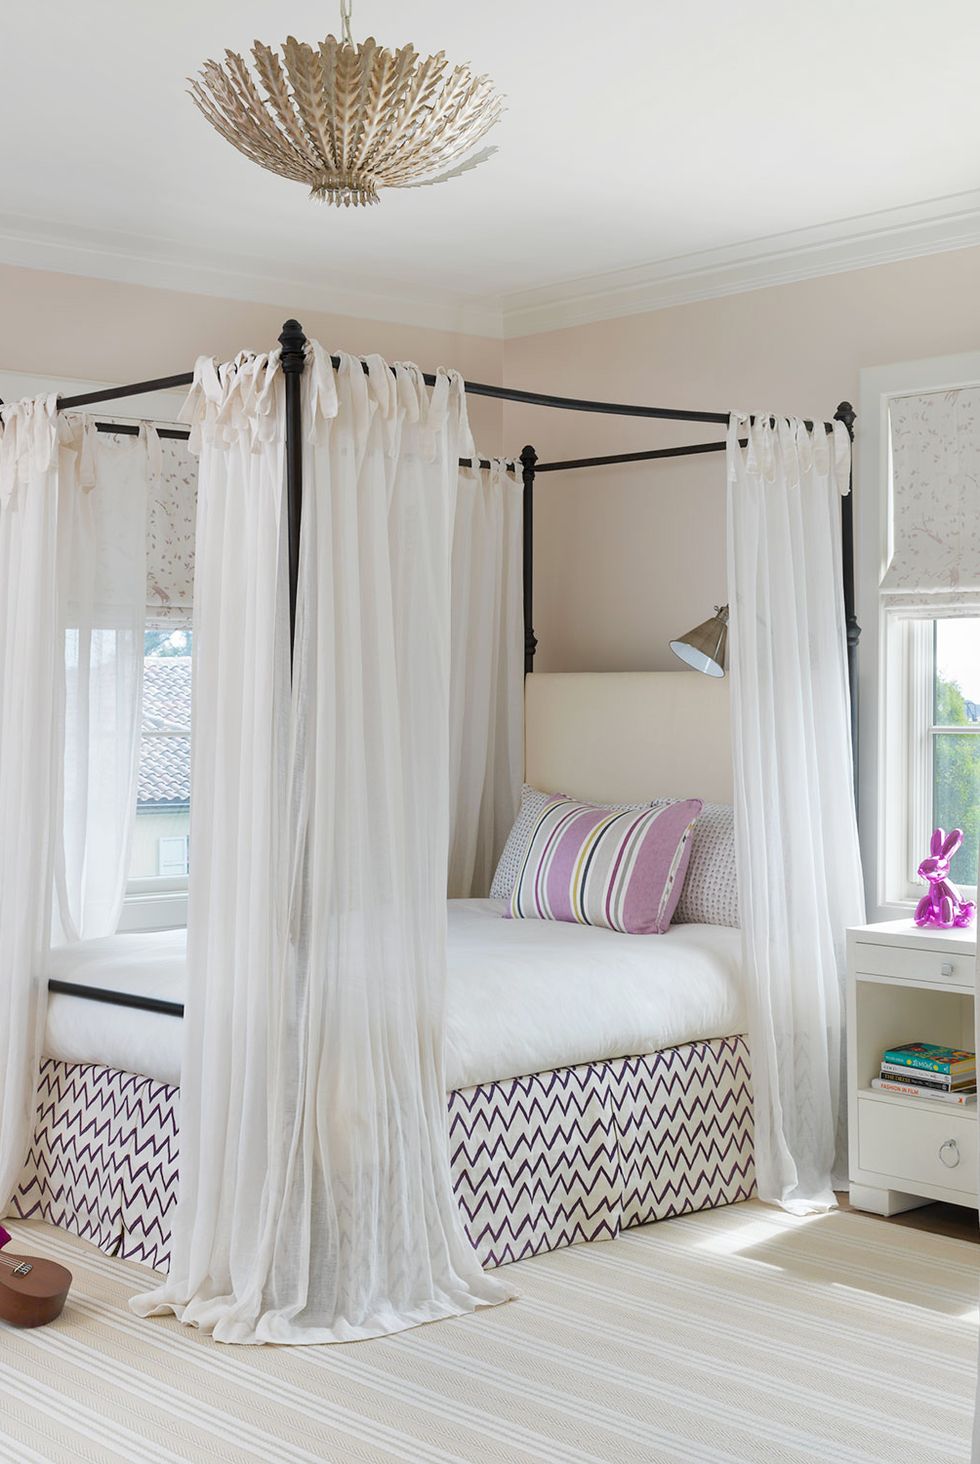 teenager bedroom with canopy bed